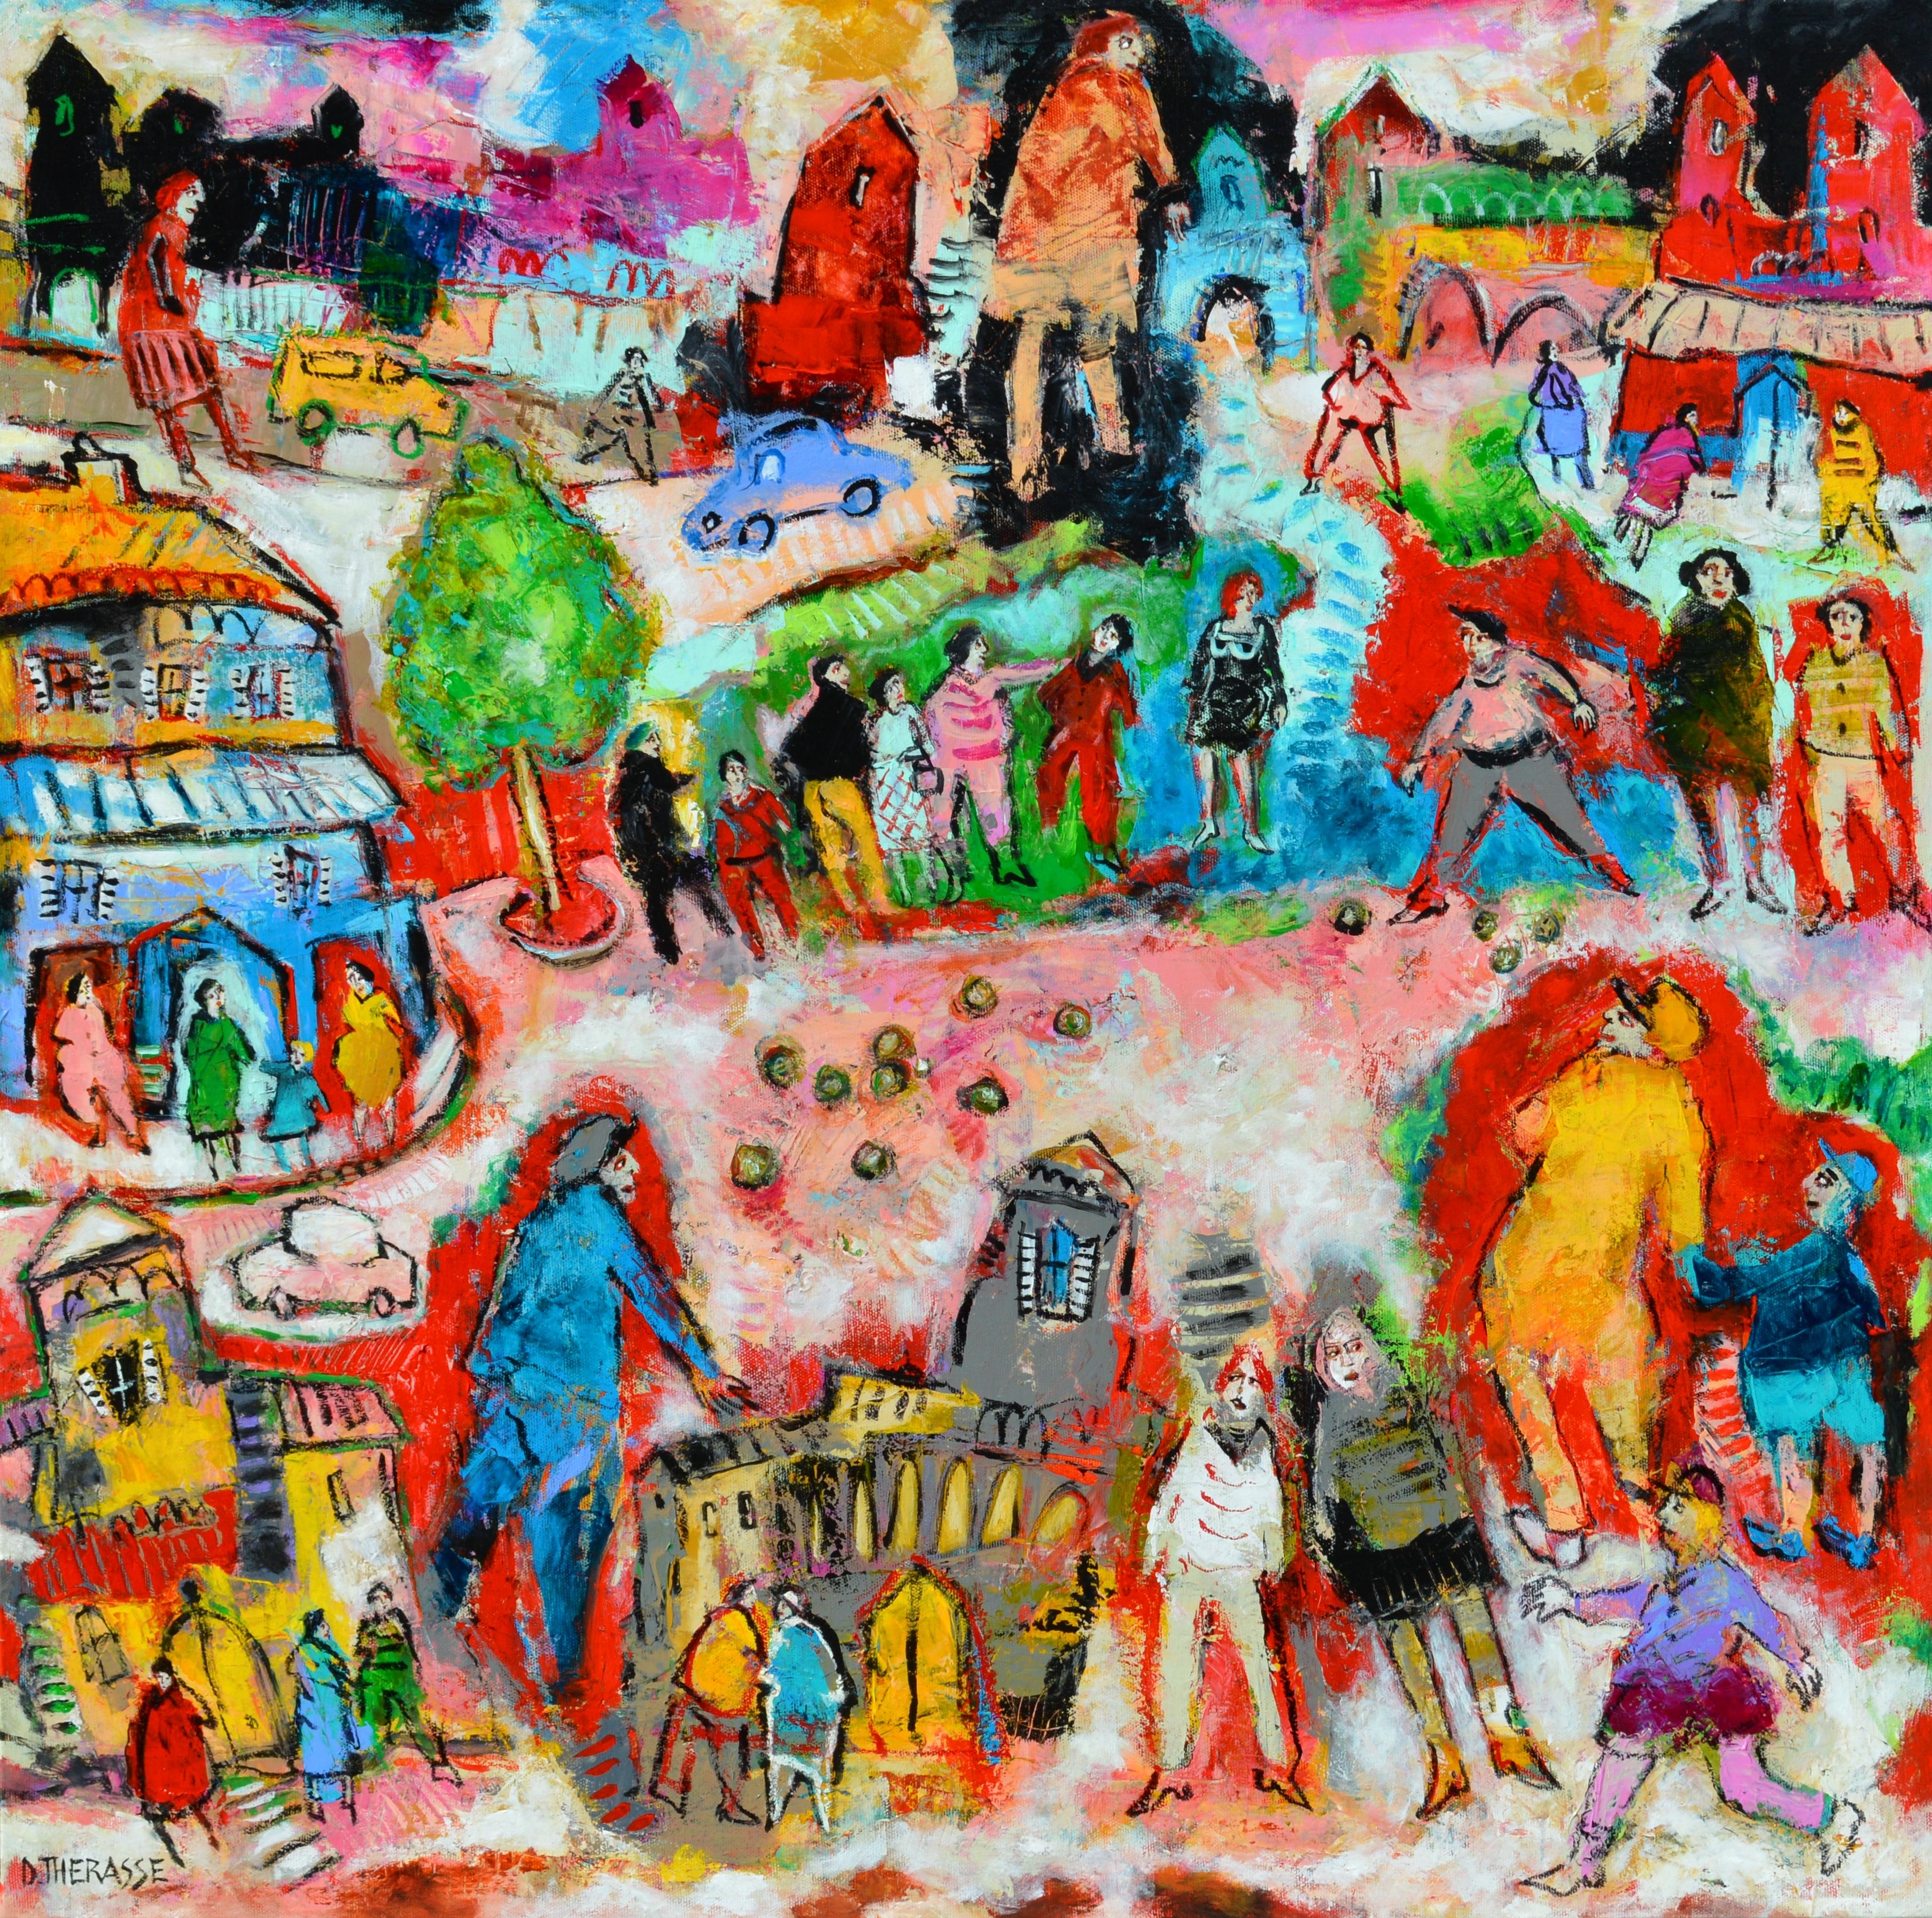 "Bocce Players", Blue Red Yellow Pink Green Poetic Figuration Painting  - Mixed Media Art by Daniel Thérasse